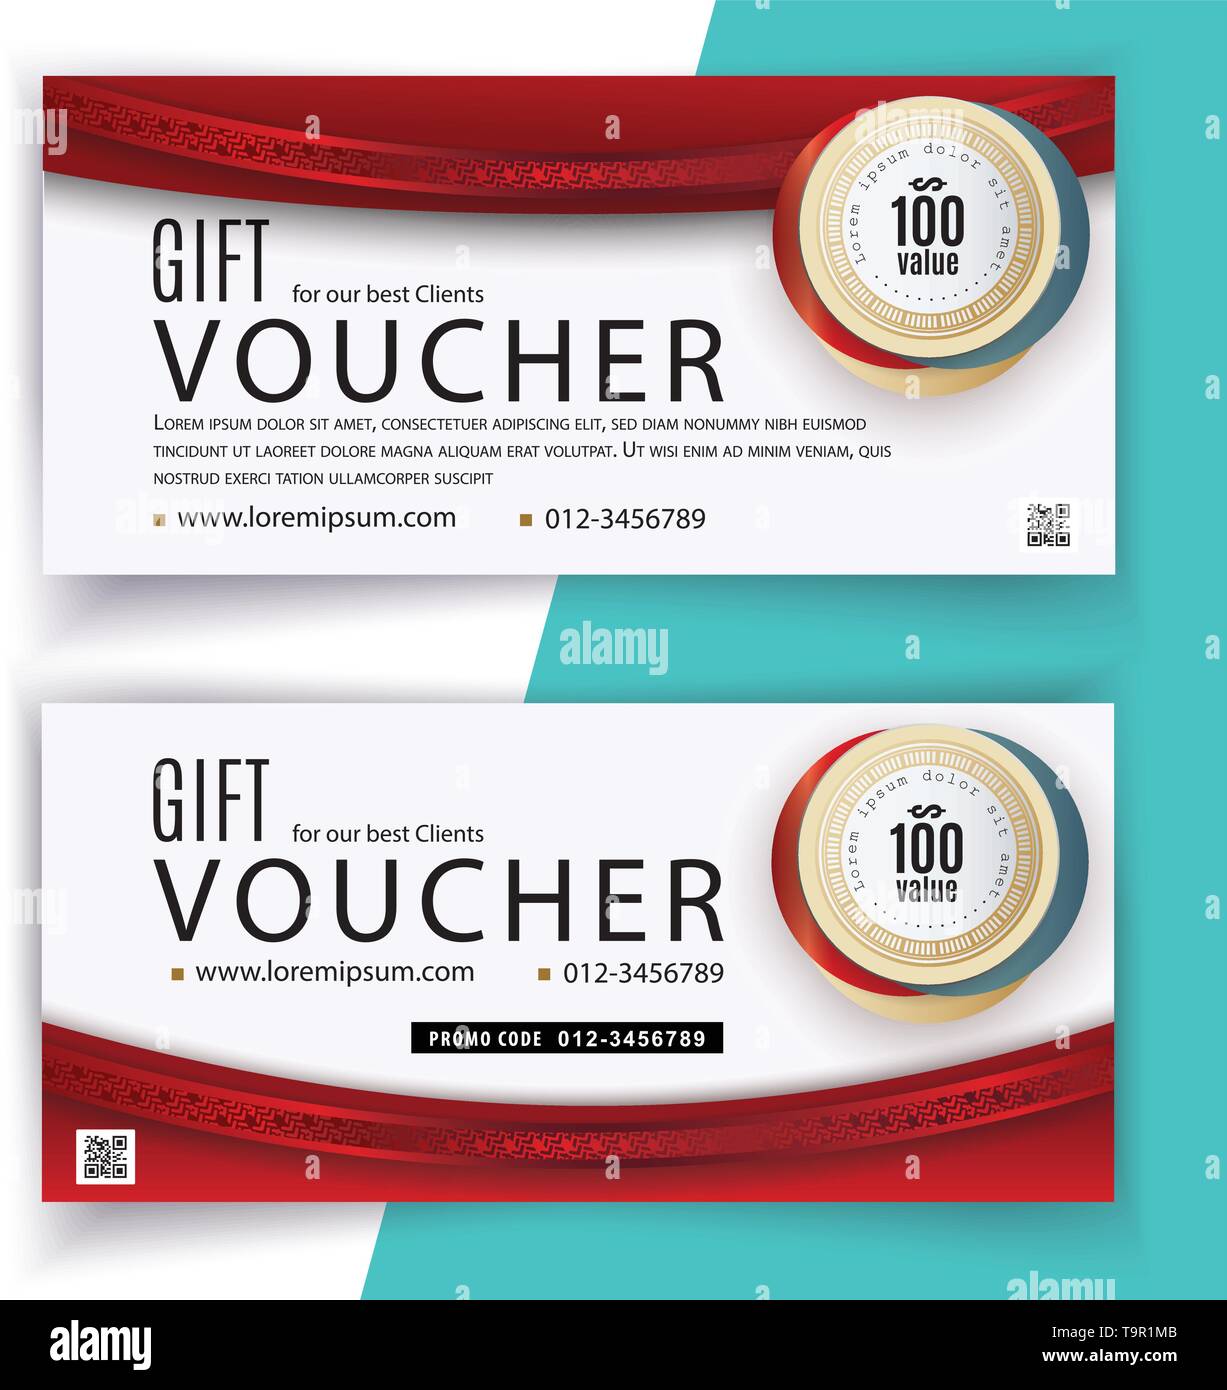 Voucher template with red design elements. Gift voucher value 100 dollars for department stores, business Stock Vector